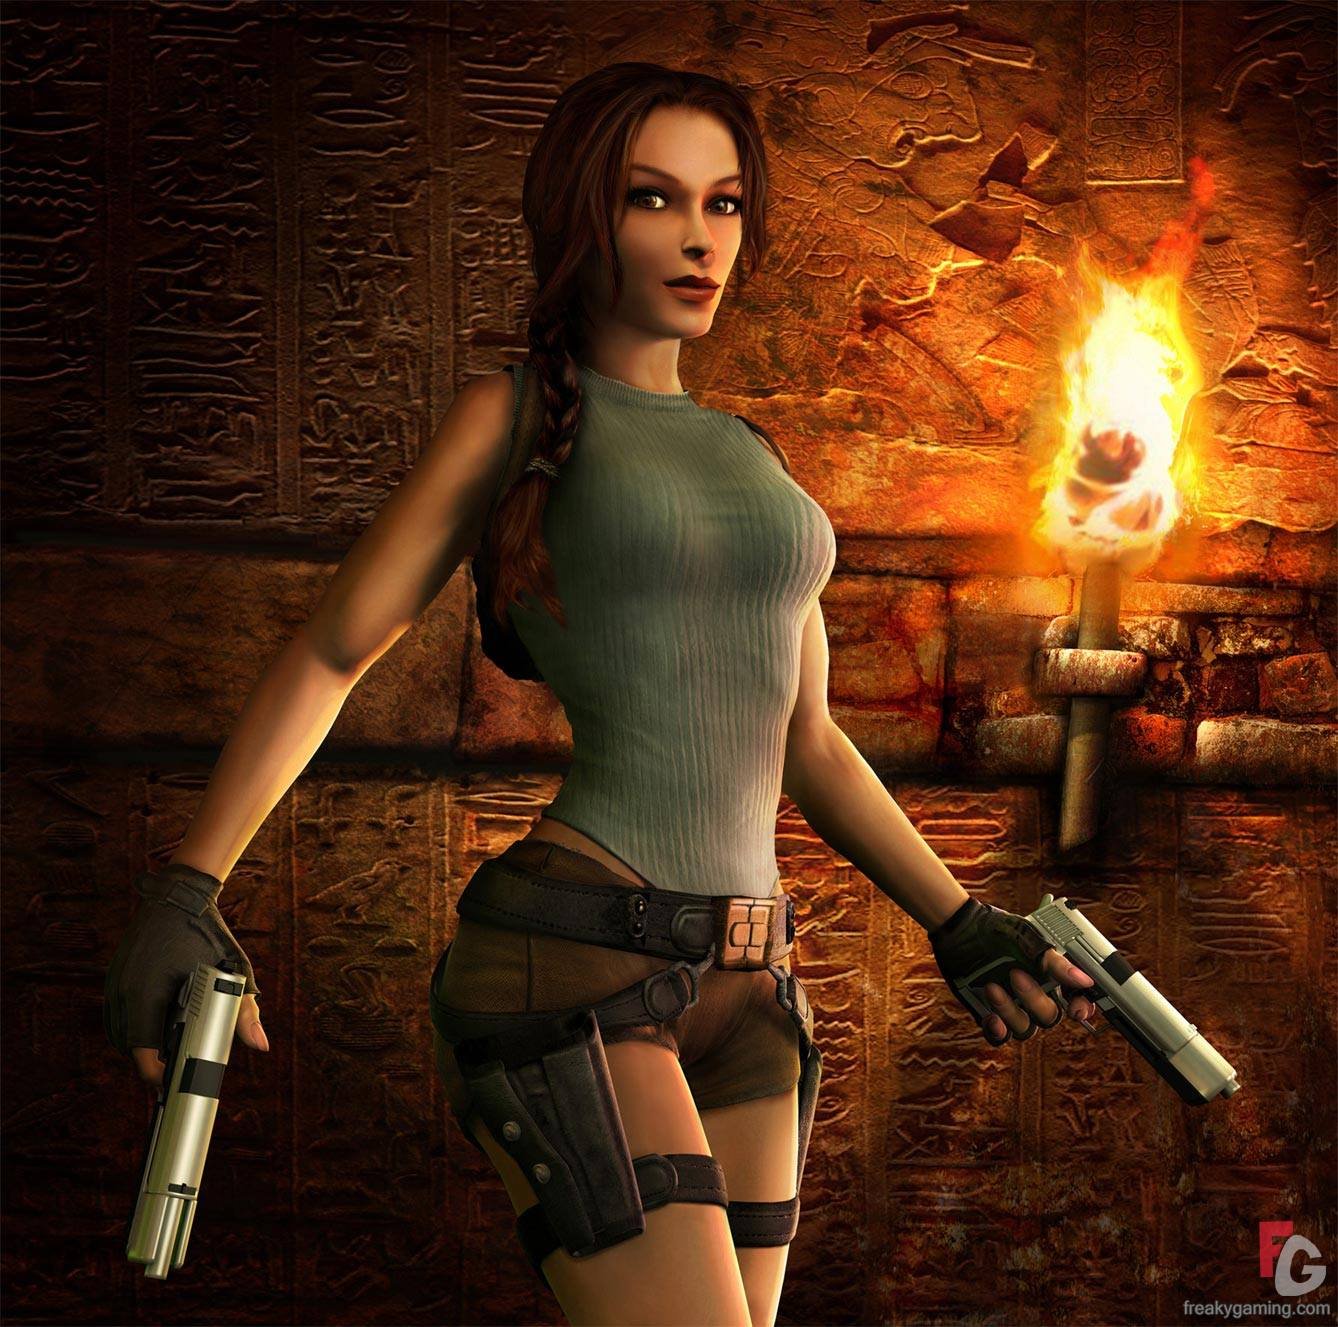 Top 10 Hottest Girls In Gaming Onlytoptens